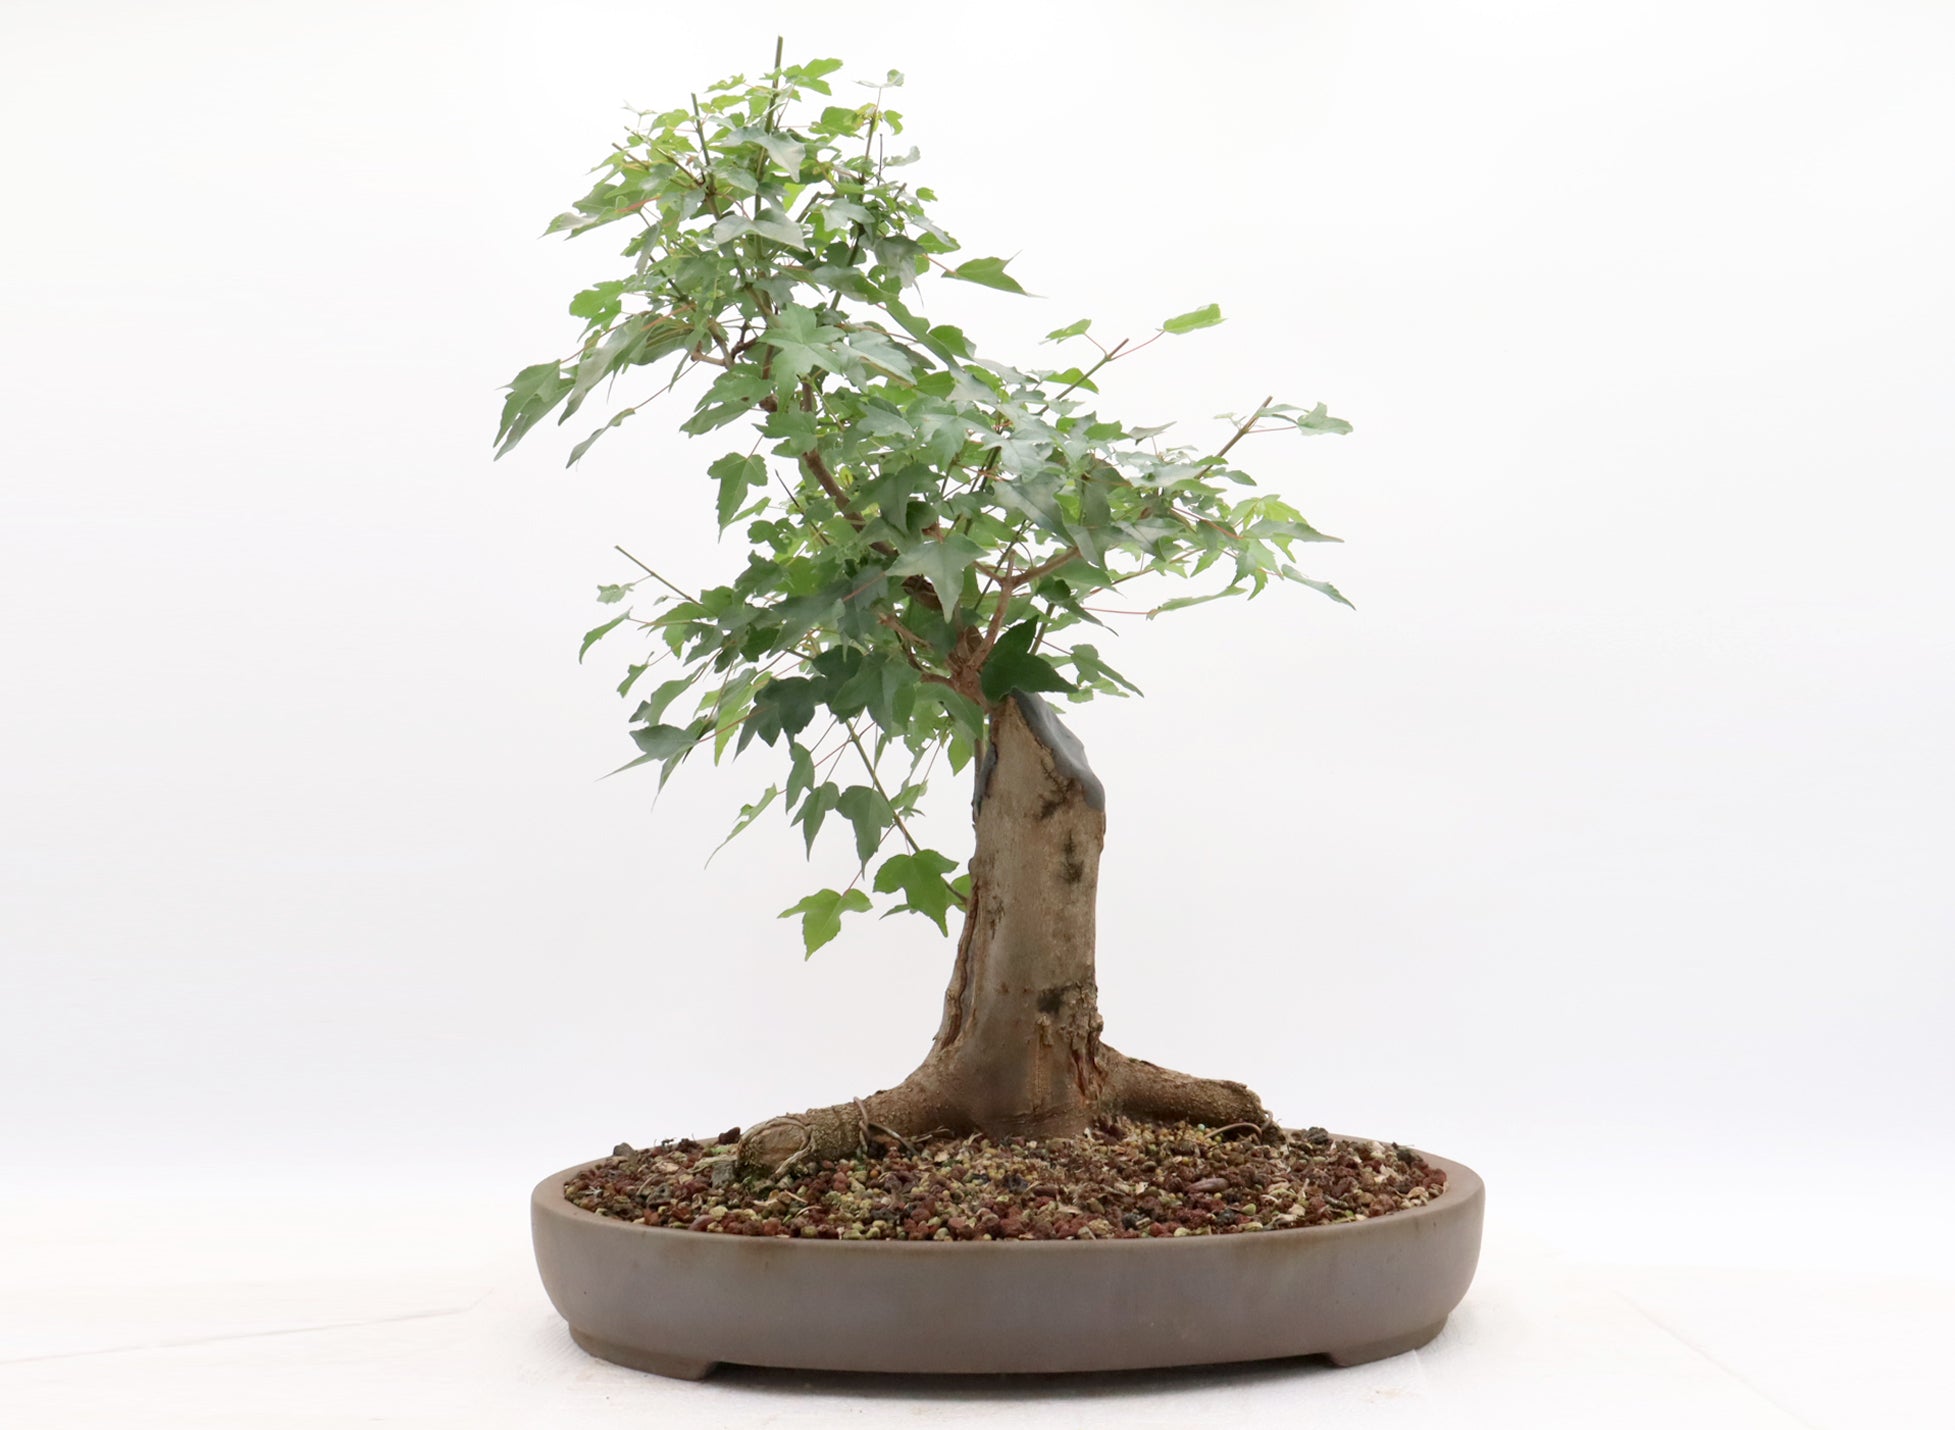 Trident Maple in an Unglazed Container